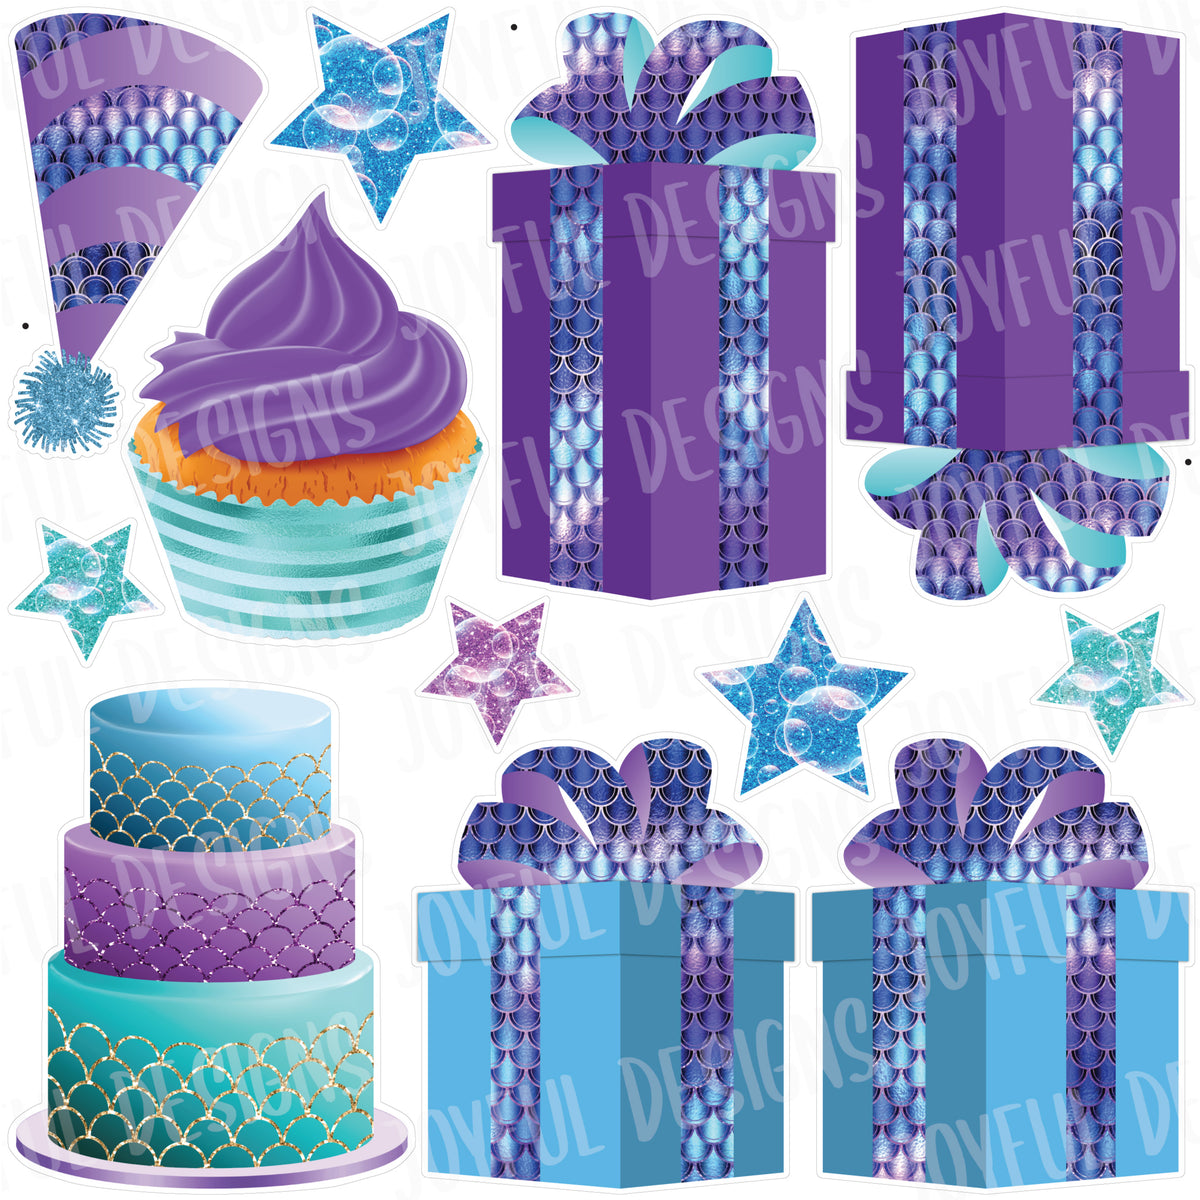 Mermaid Birthday Flair Half from "One and Done" Set